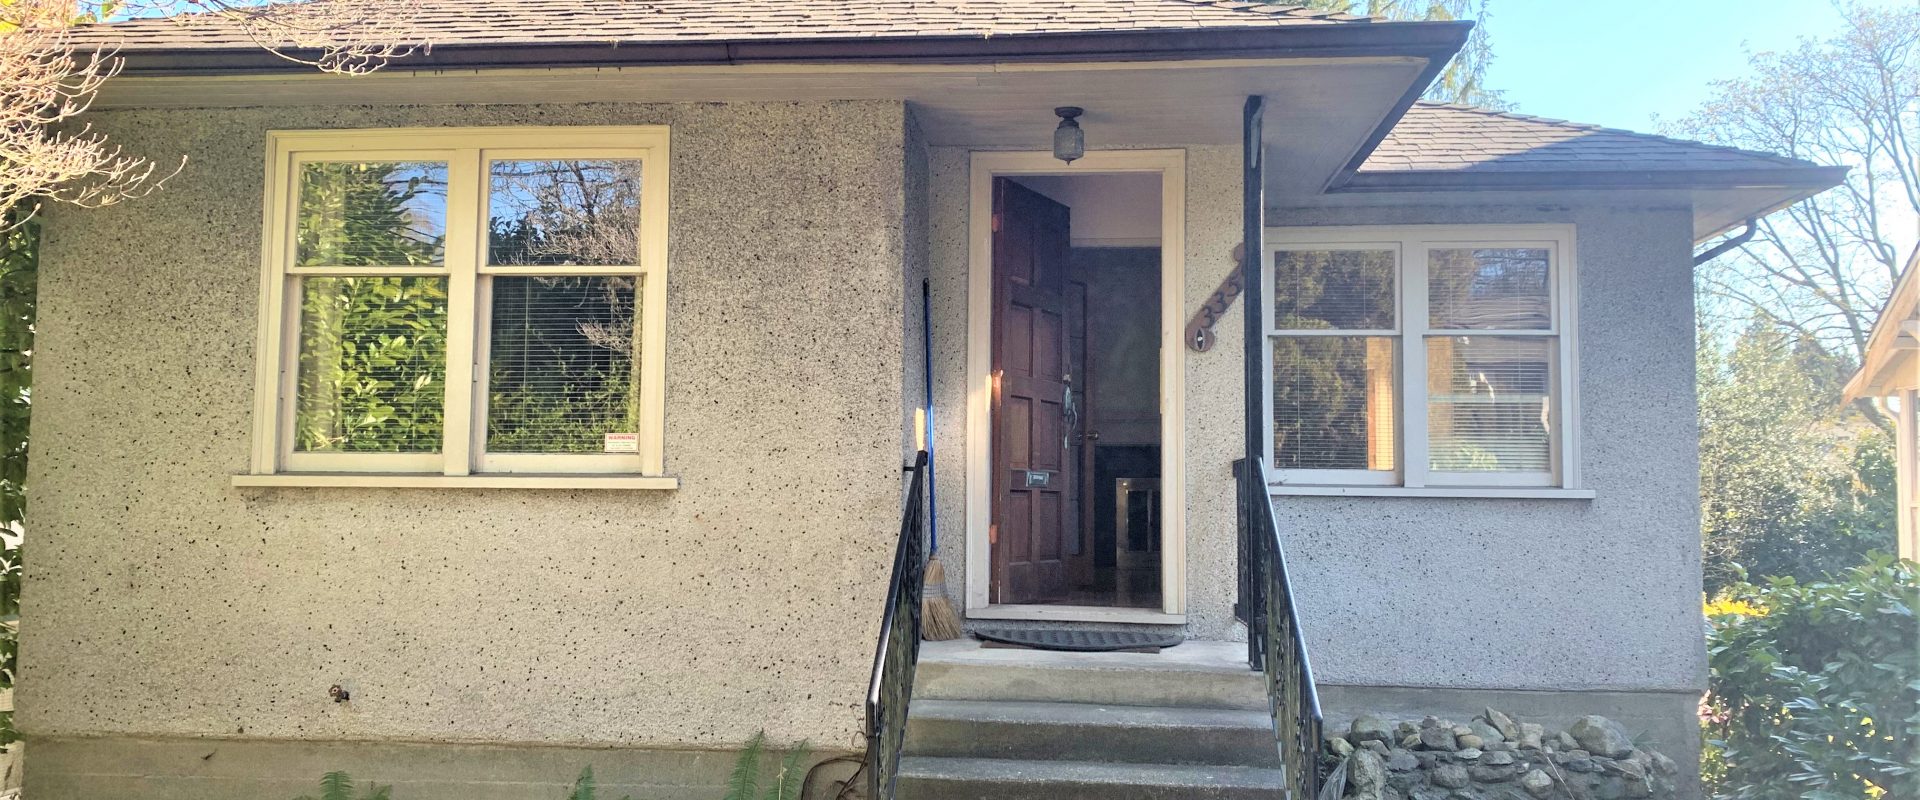 Kerrisdale Area! Most Affordable 2br Home in Vancouver West!